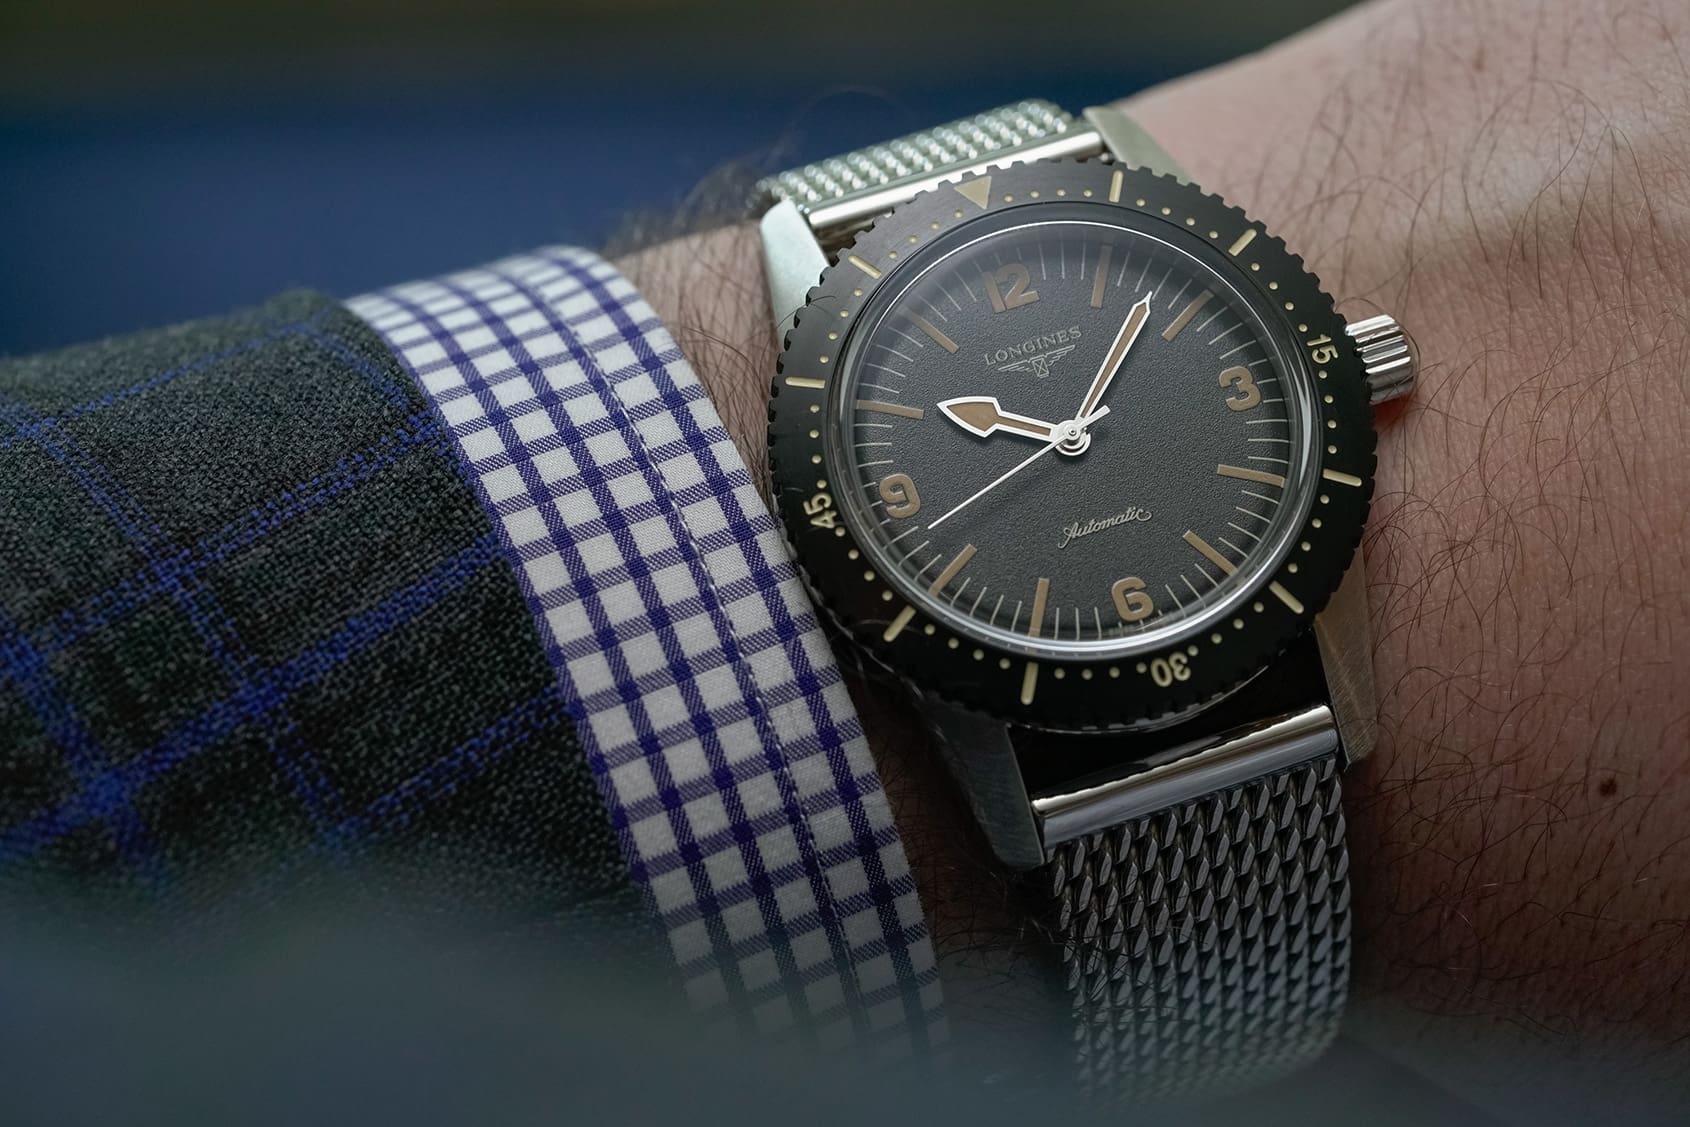 Exploring the Longines Skin Diver Watch